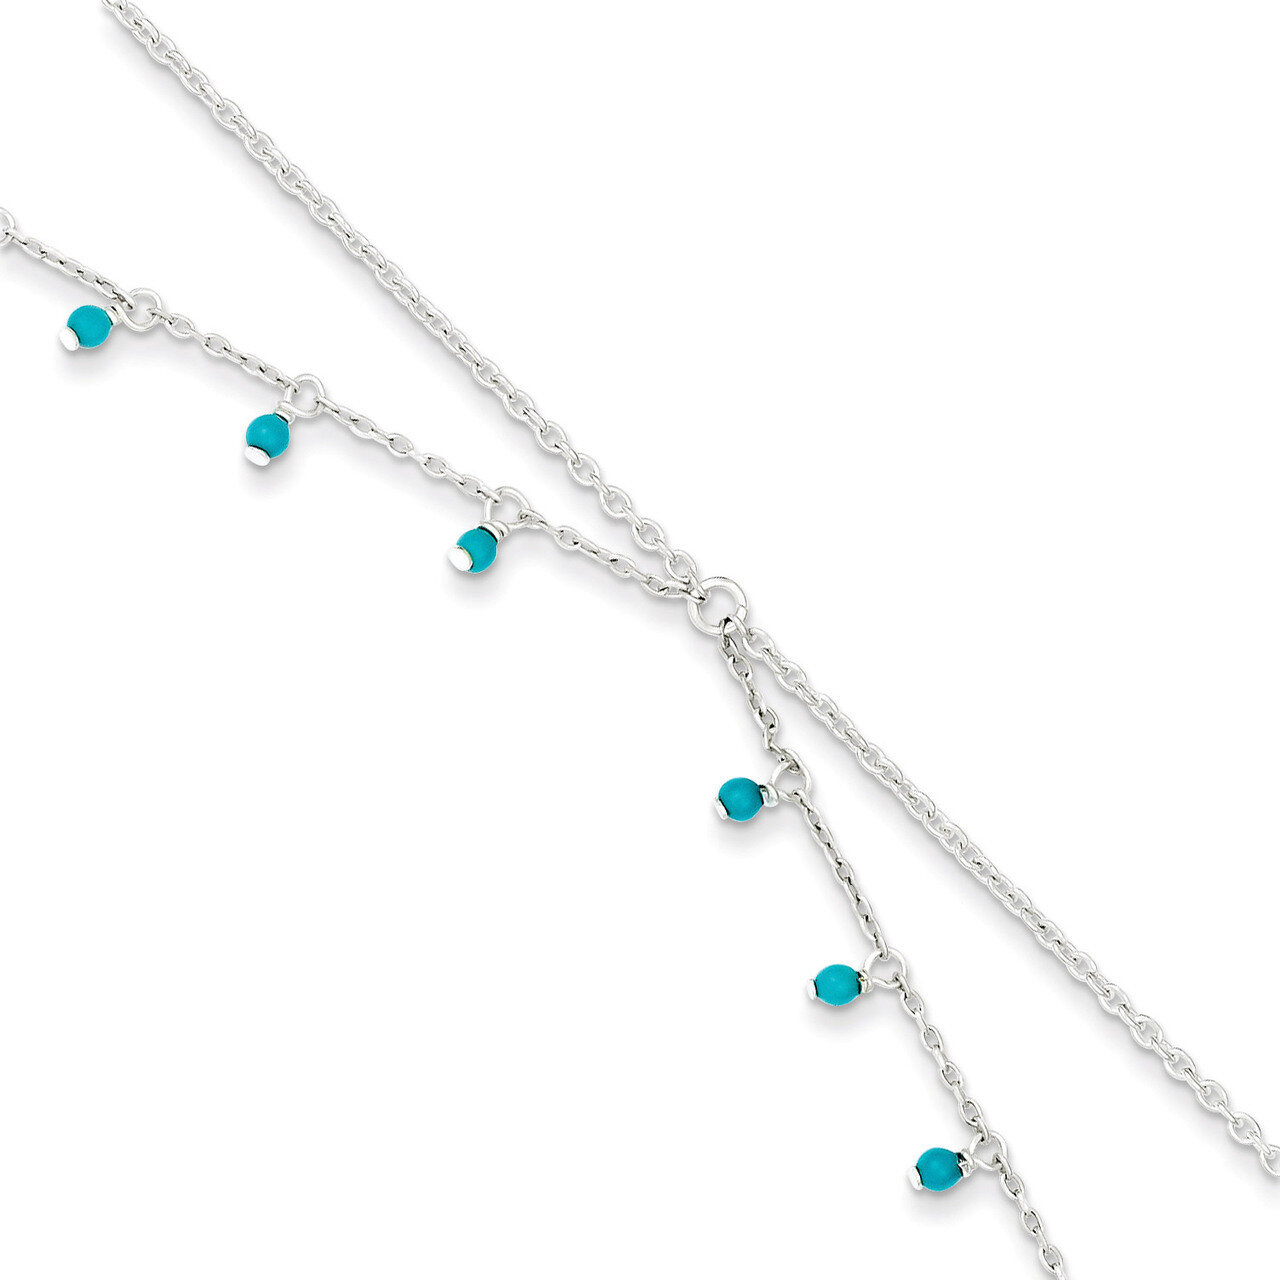 10 Inch Turquoise Double Chain Anklet Bracelet Sterling Silver QG1394-10